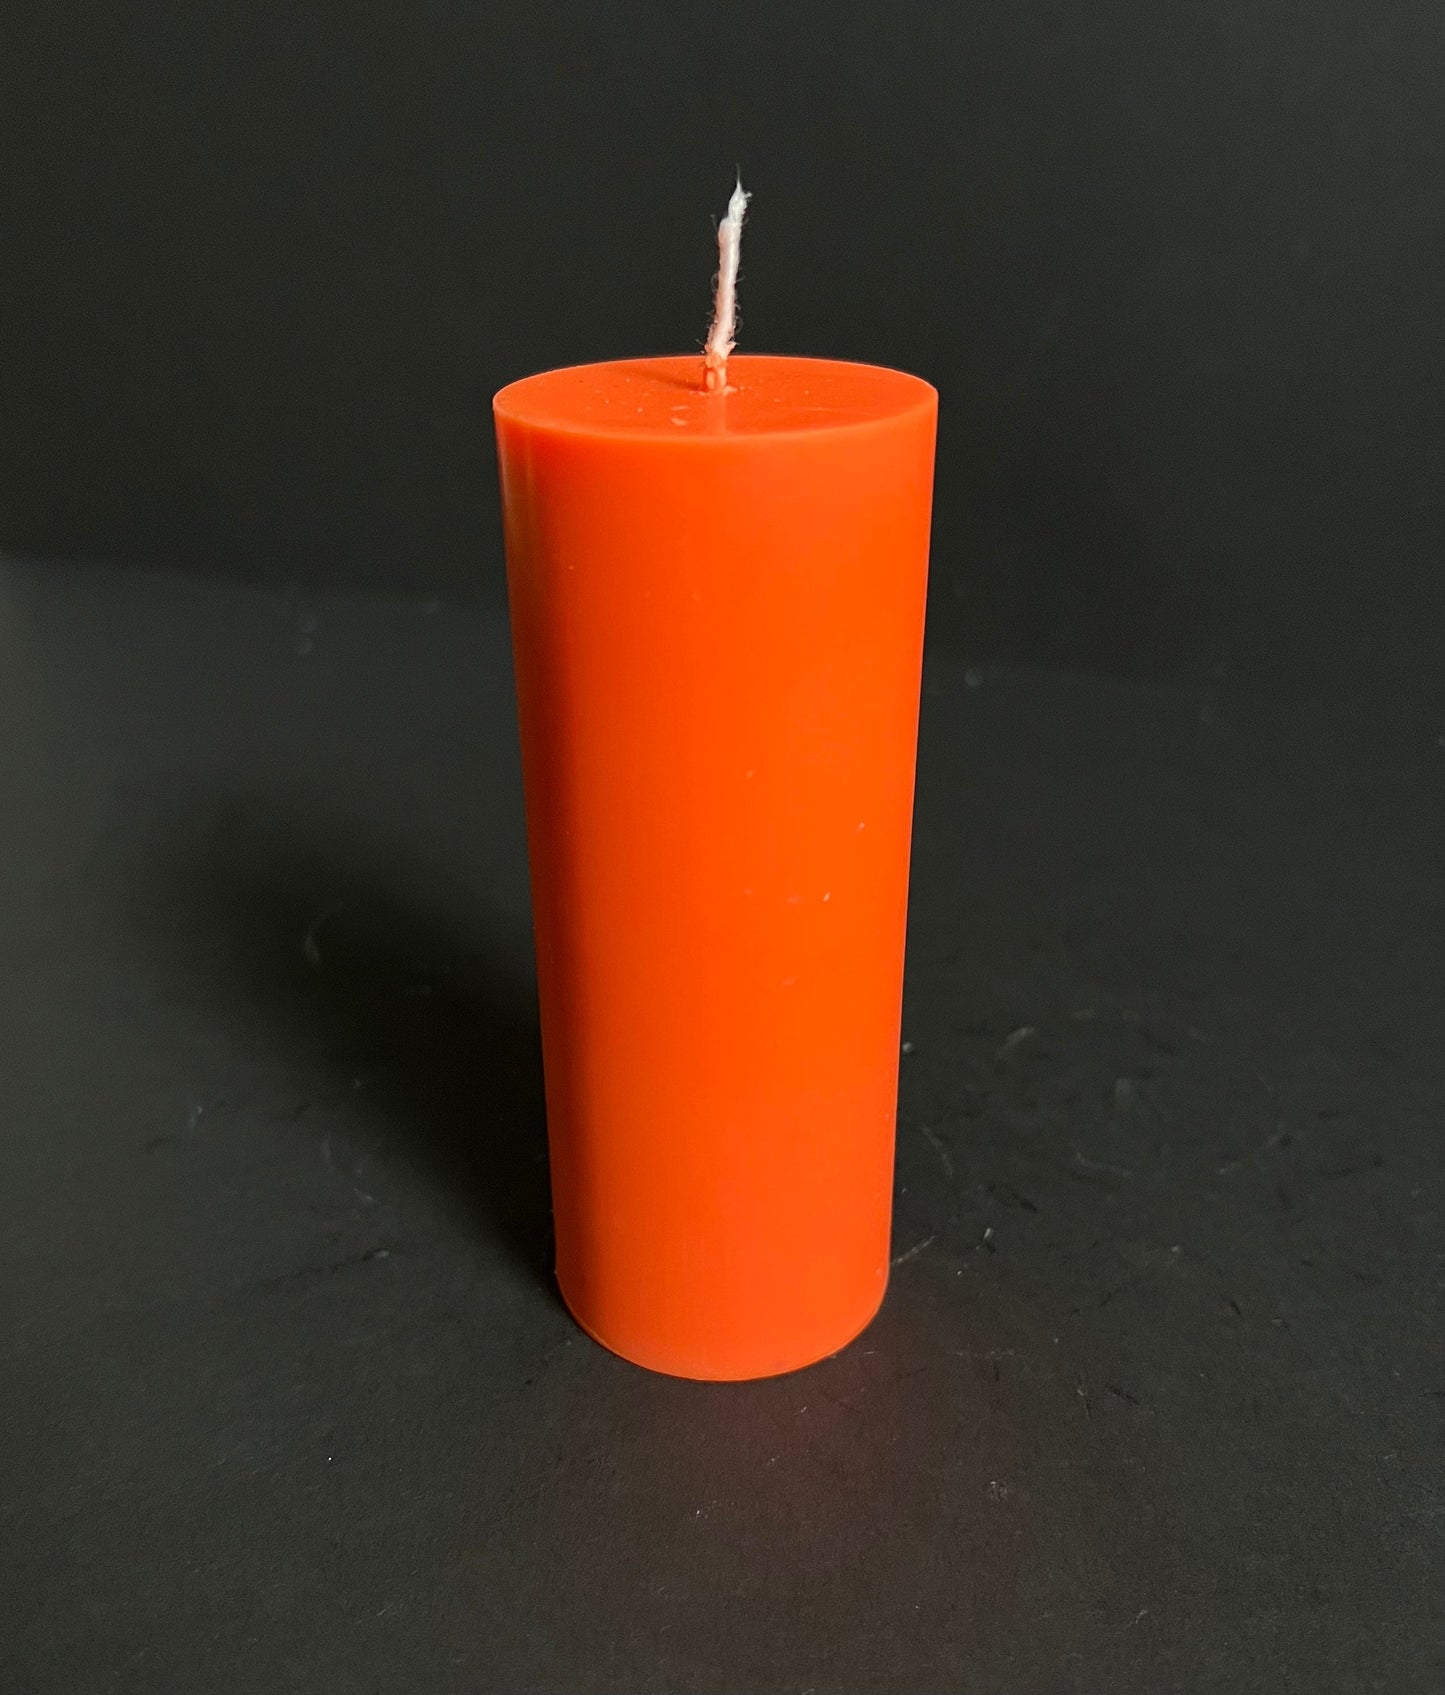 Wax Play Candles Neon Edition (Set of 4)